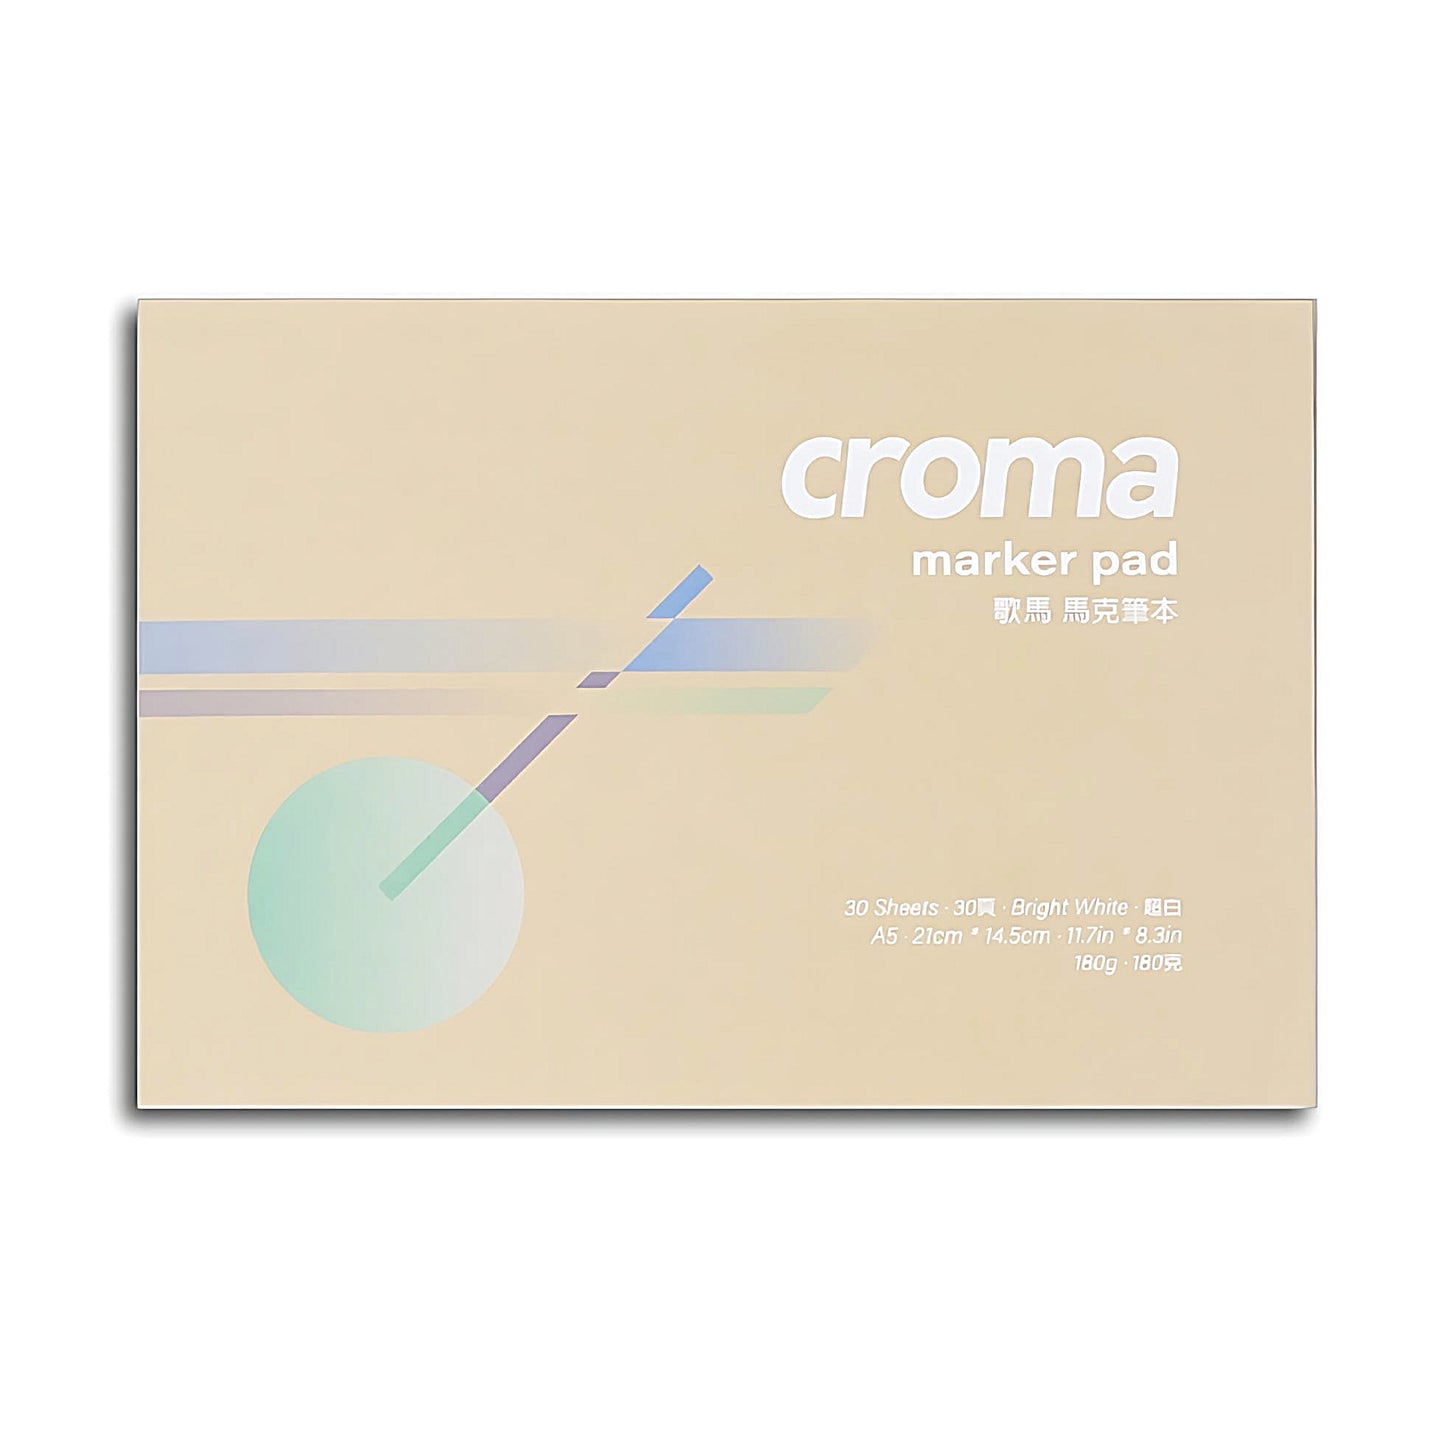 Croma marker pad in A5 format